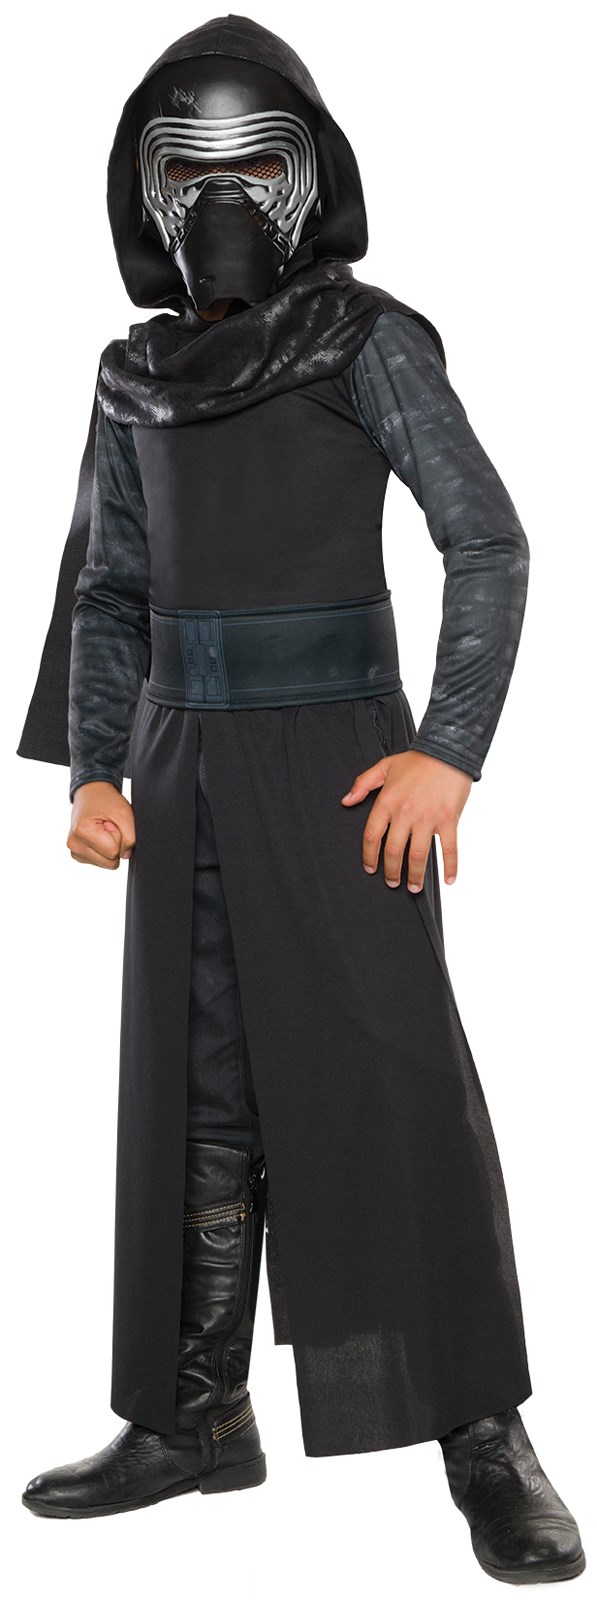 Star Wars Episode 7 – Classic Kylo Ren Costume For Boys